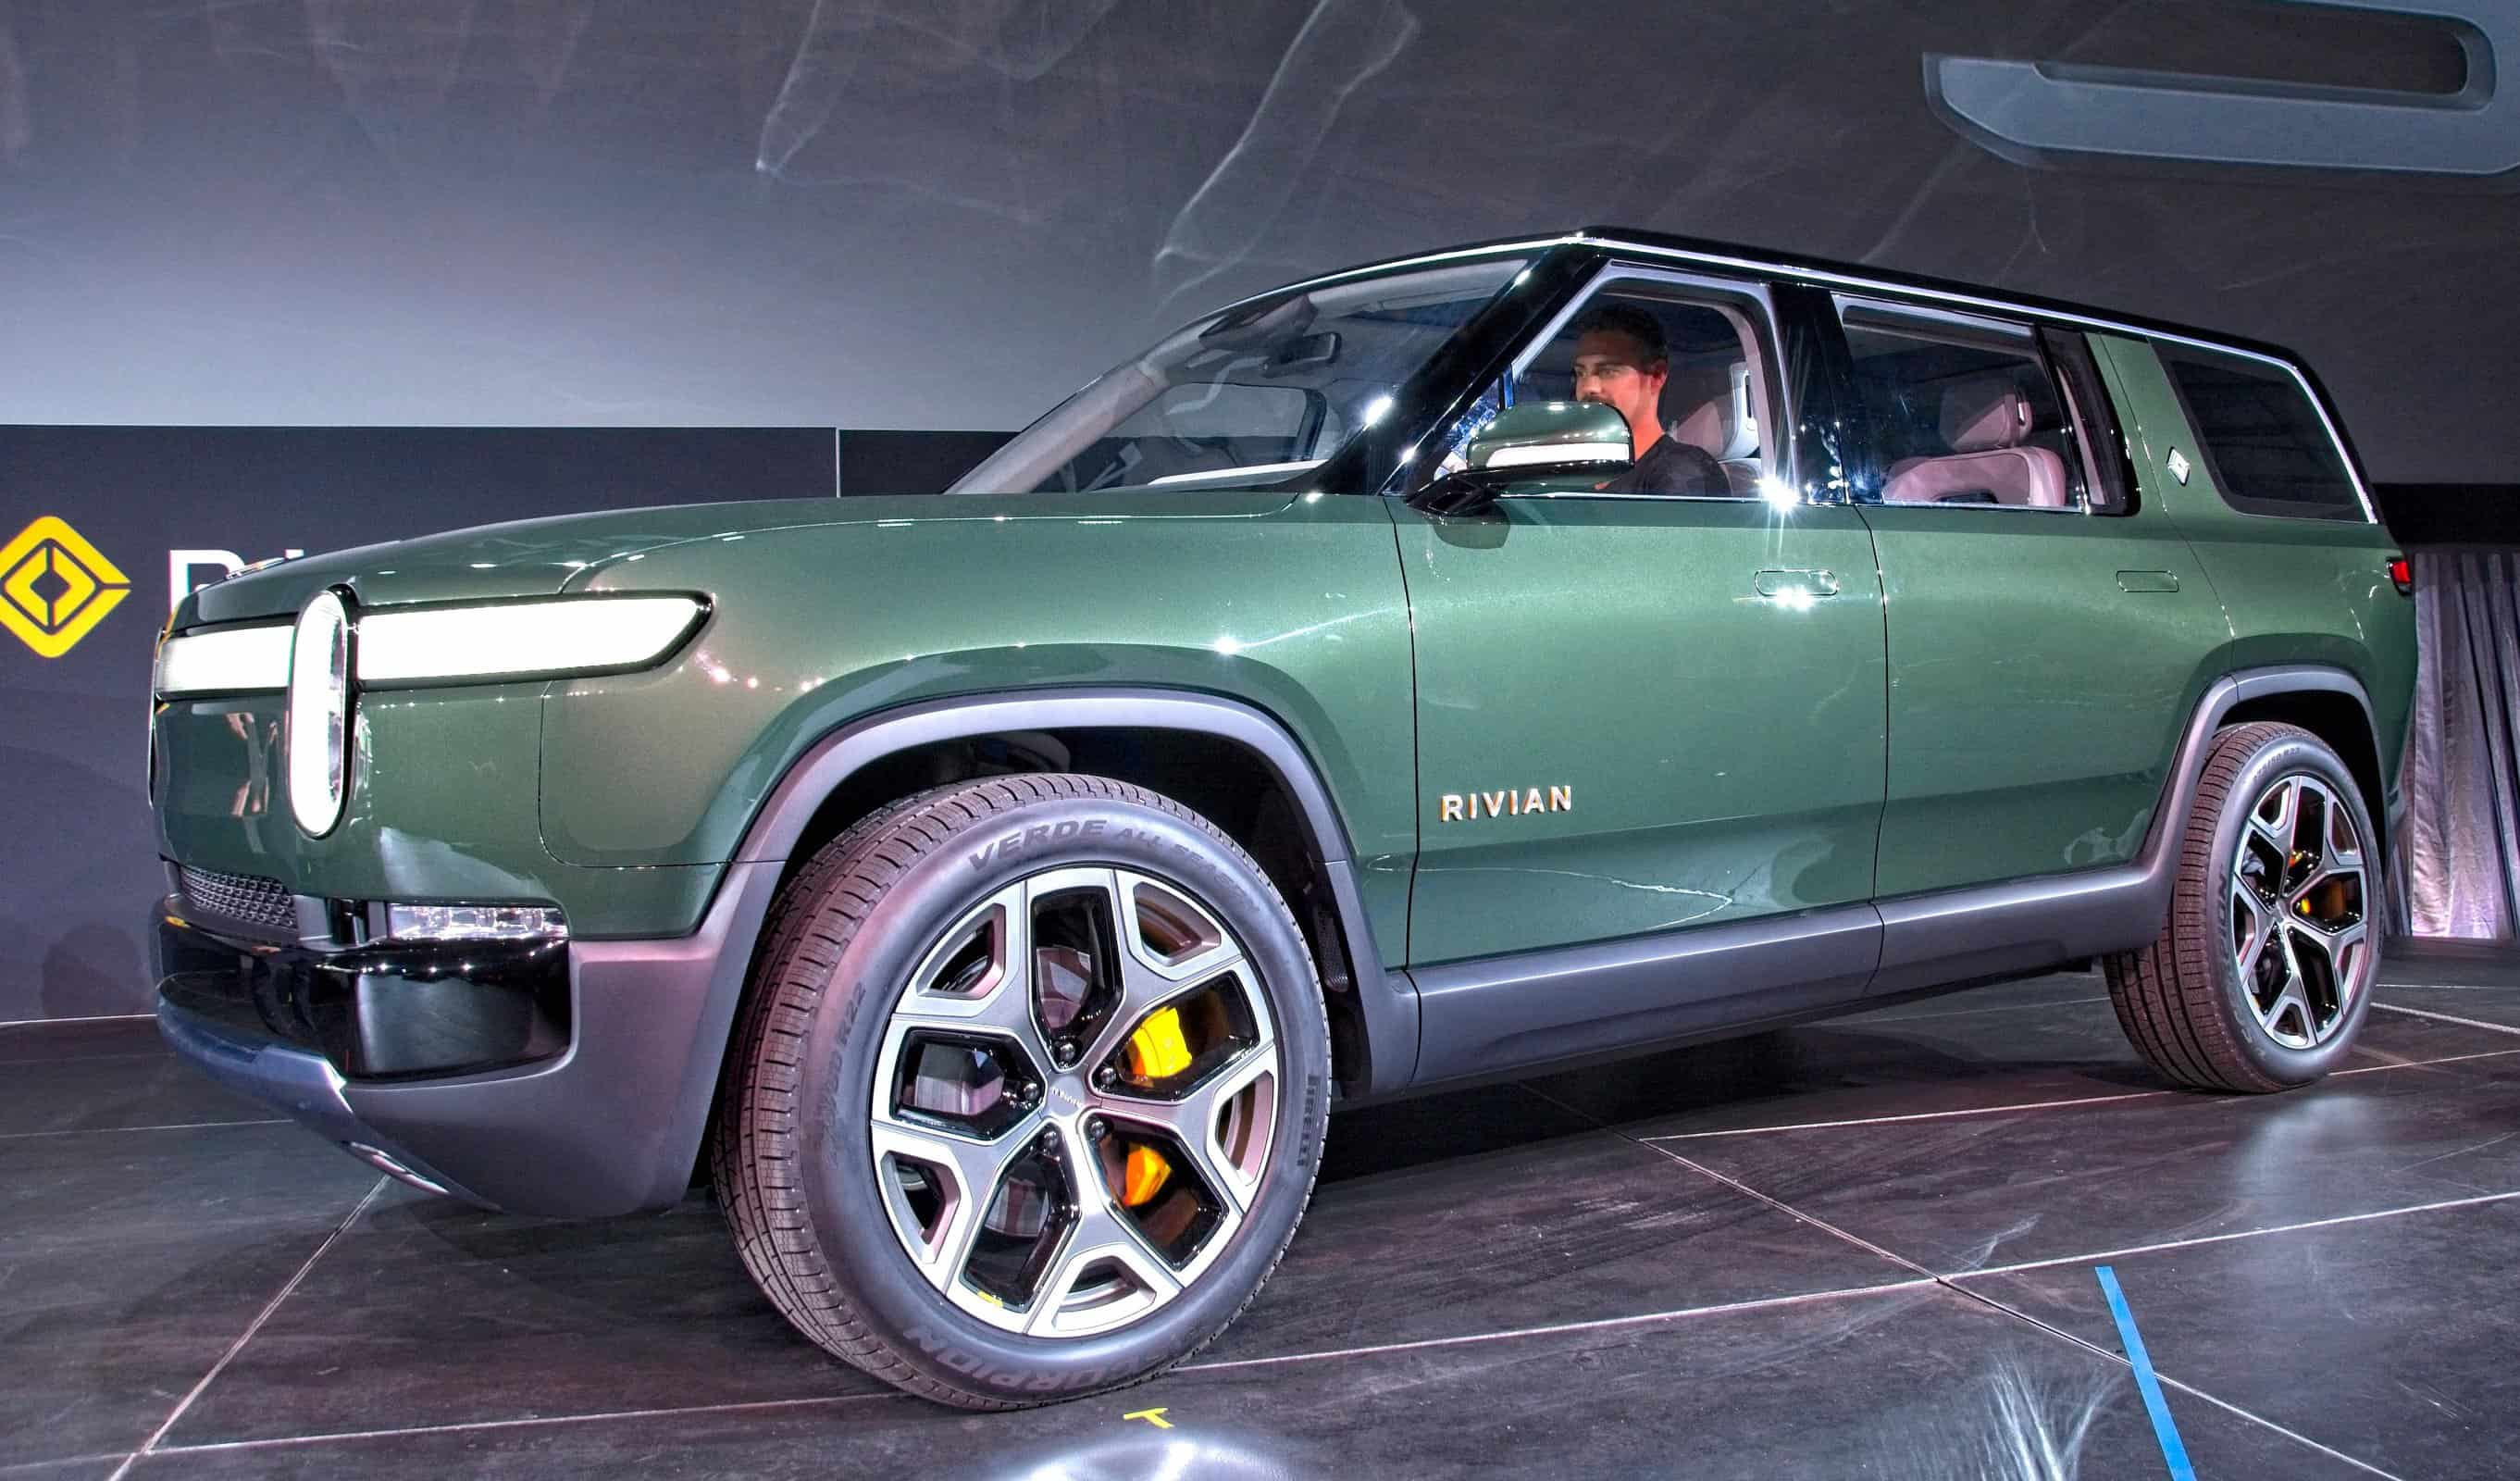 Debut of the Rivian R1S SUV at the 2018 Los Angeles Auto Show, November 27, 2018 by Richard Truesdell